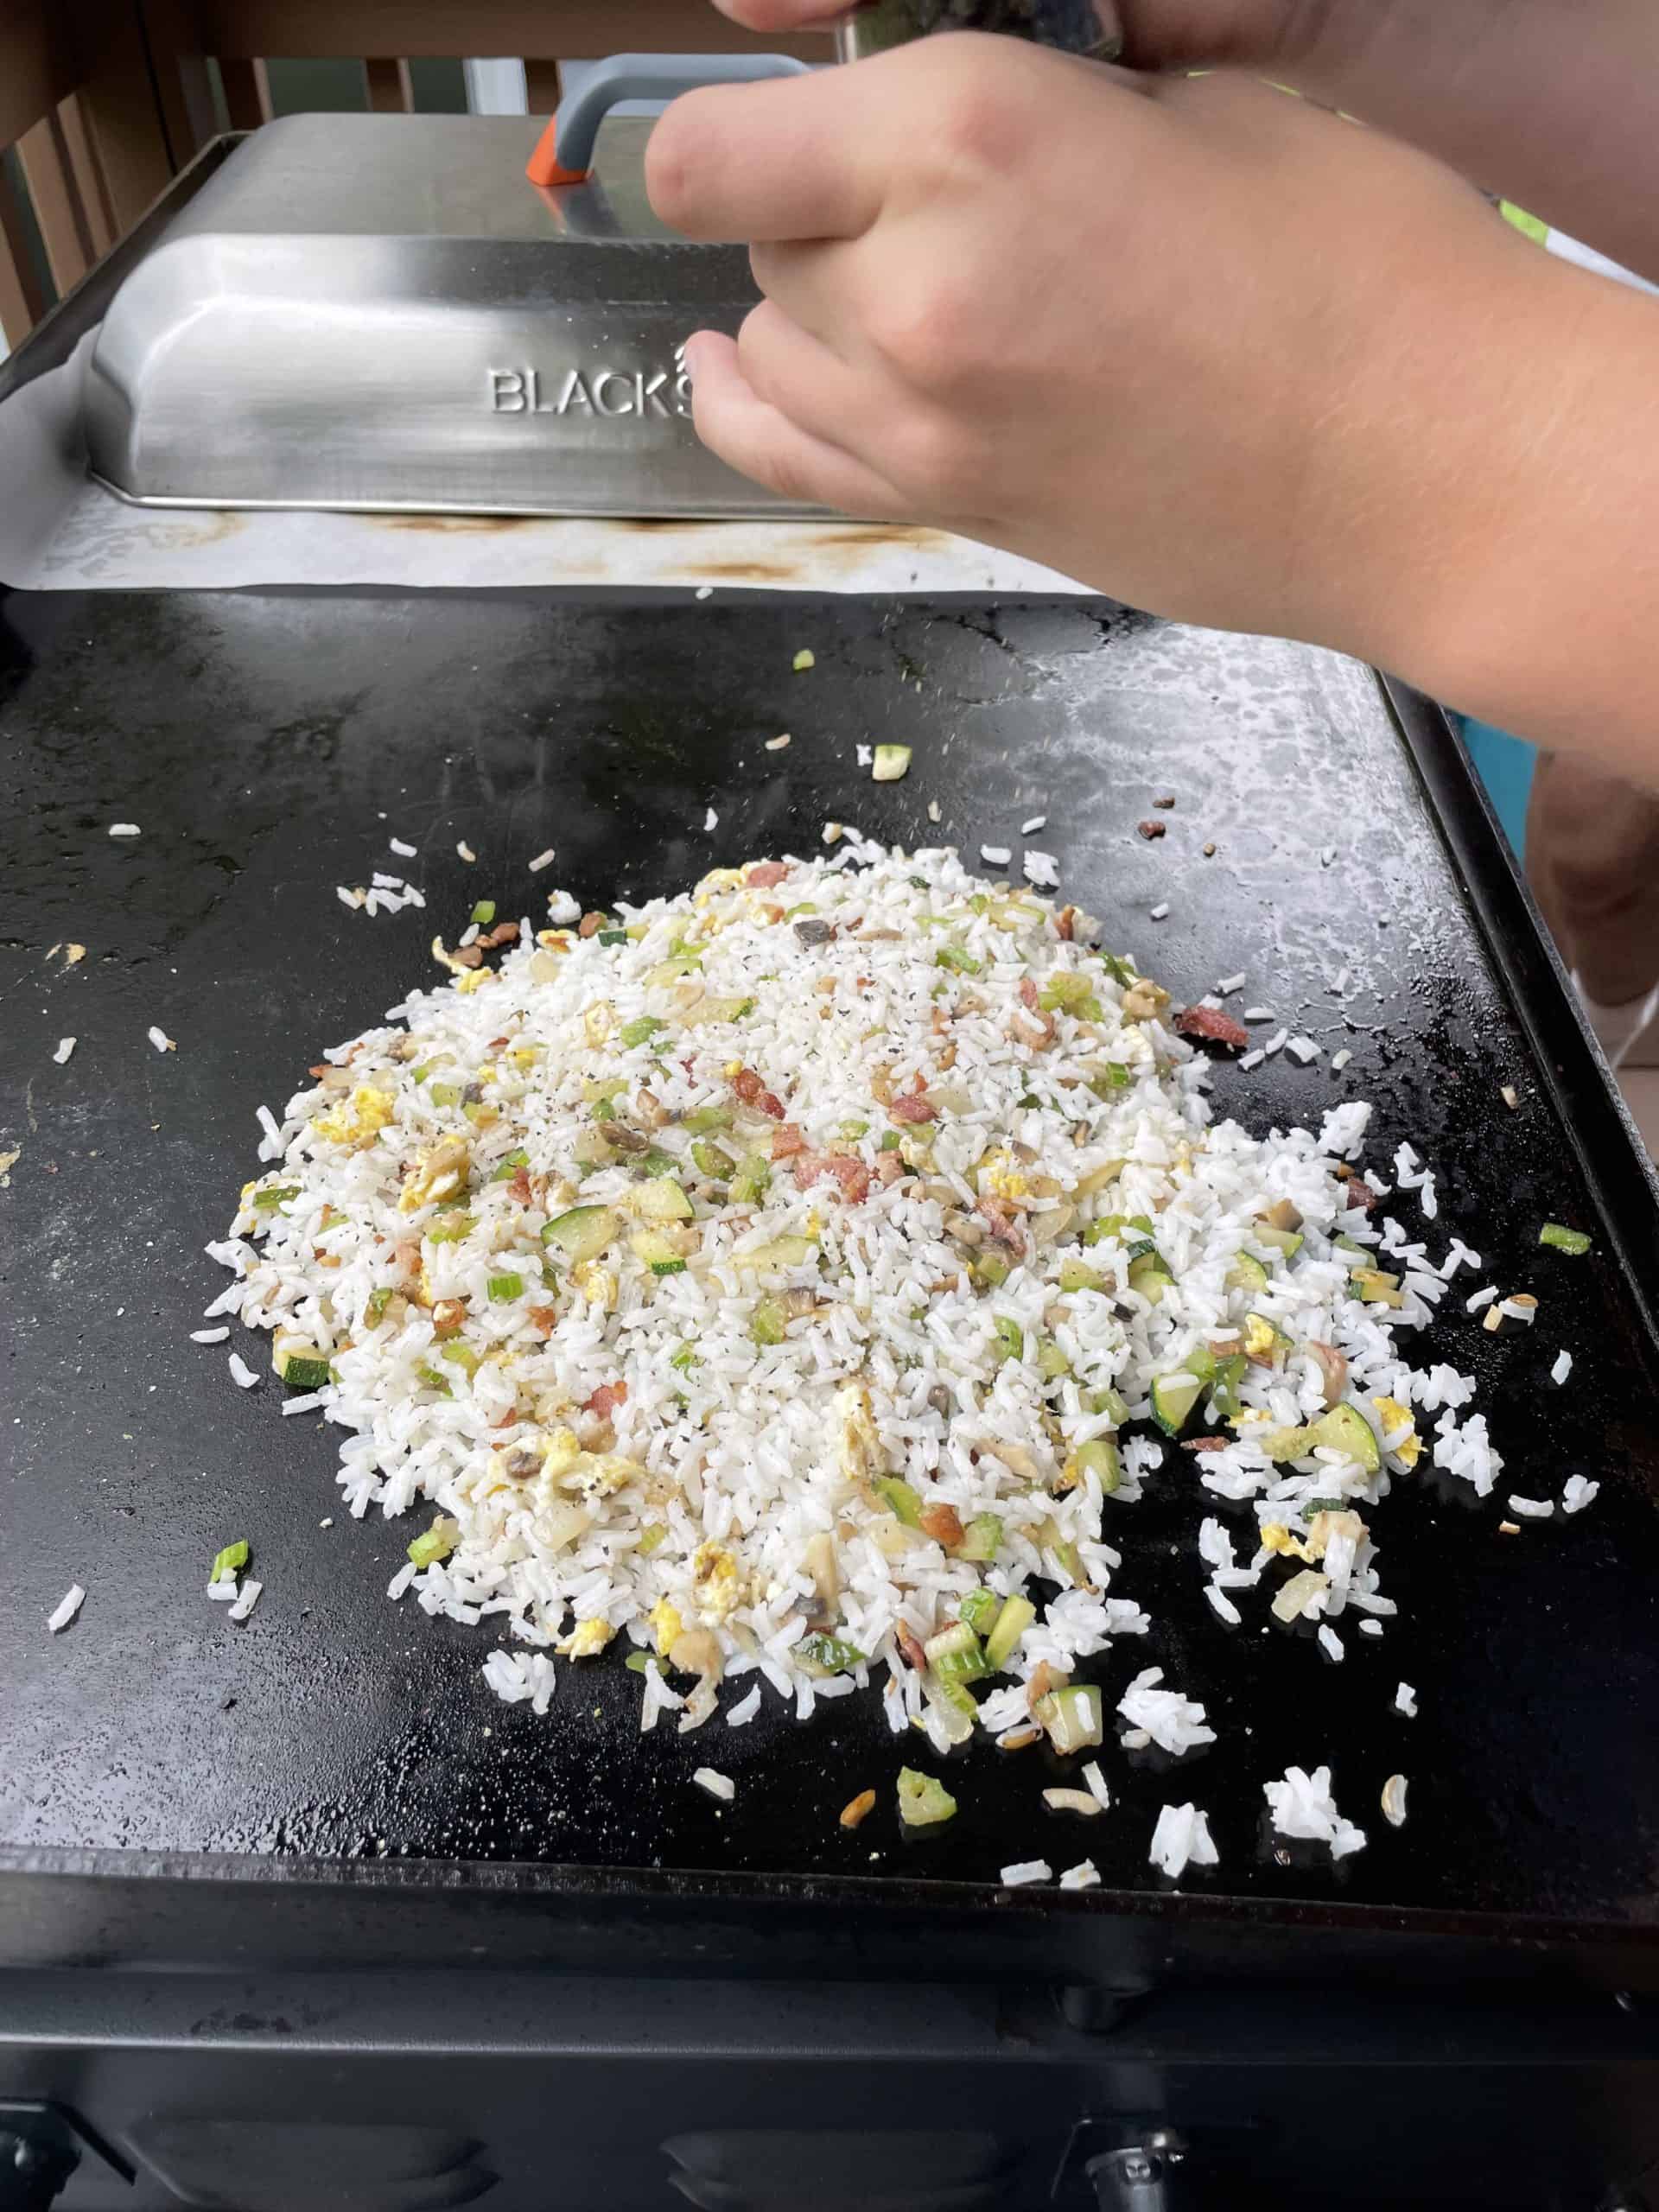 How to Make Chicken Fried Rice on a Blackstone Griddle with white rice, sautéed Vegetables, bacon, egg and seasonings.